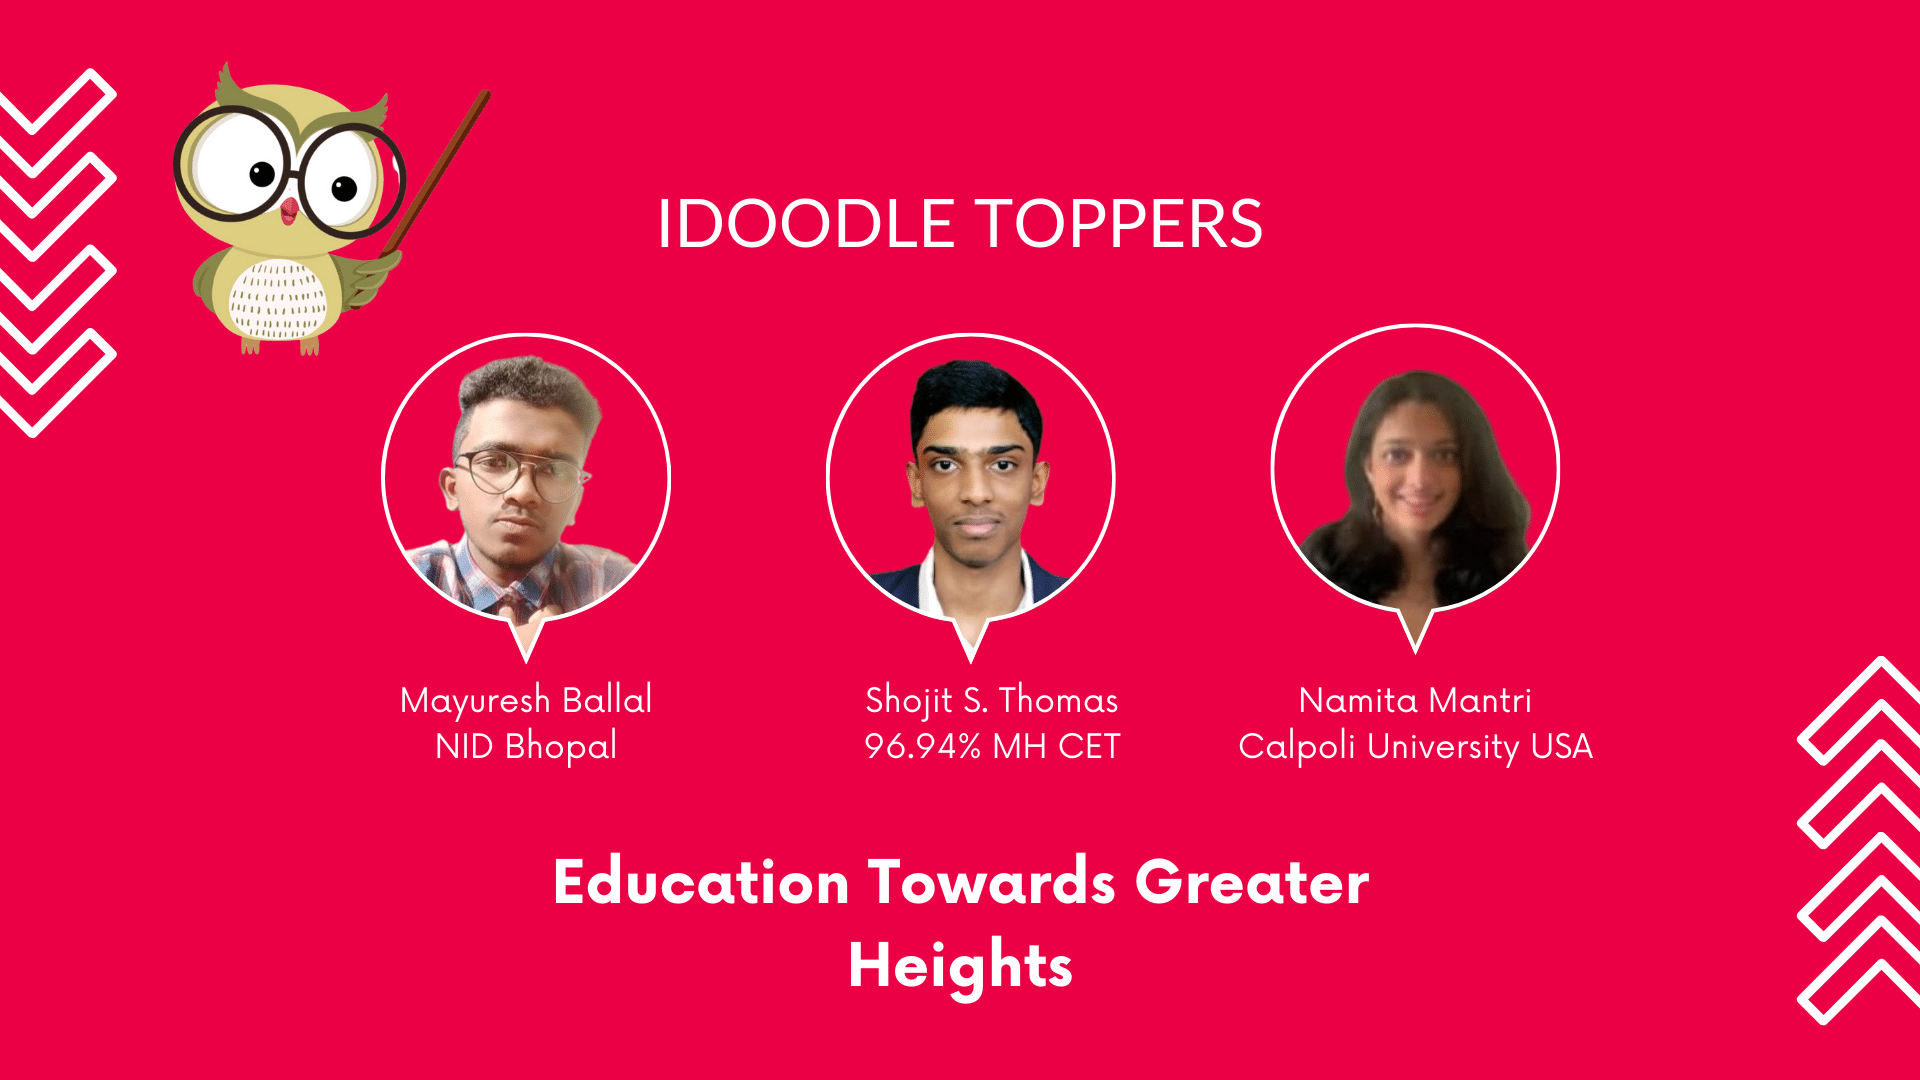 Idoodle toppers with Idoodle - best Design & Architecture Coaching classes